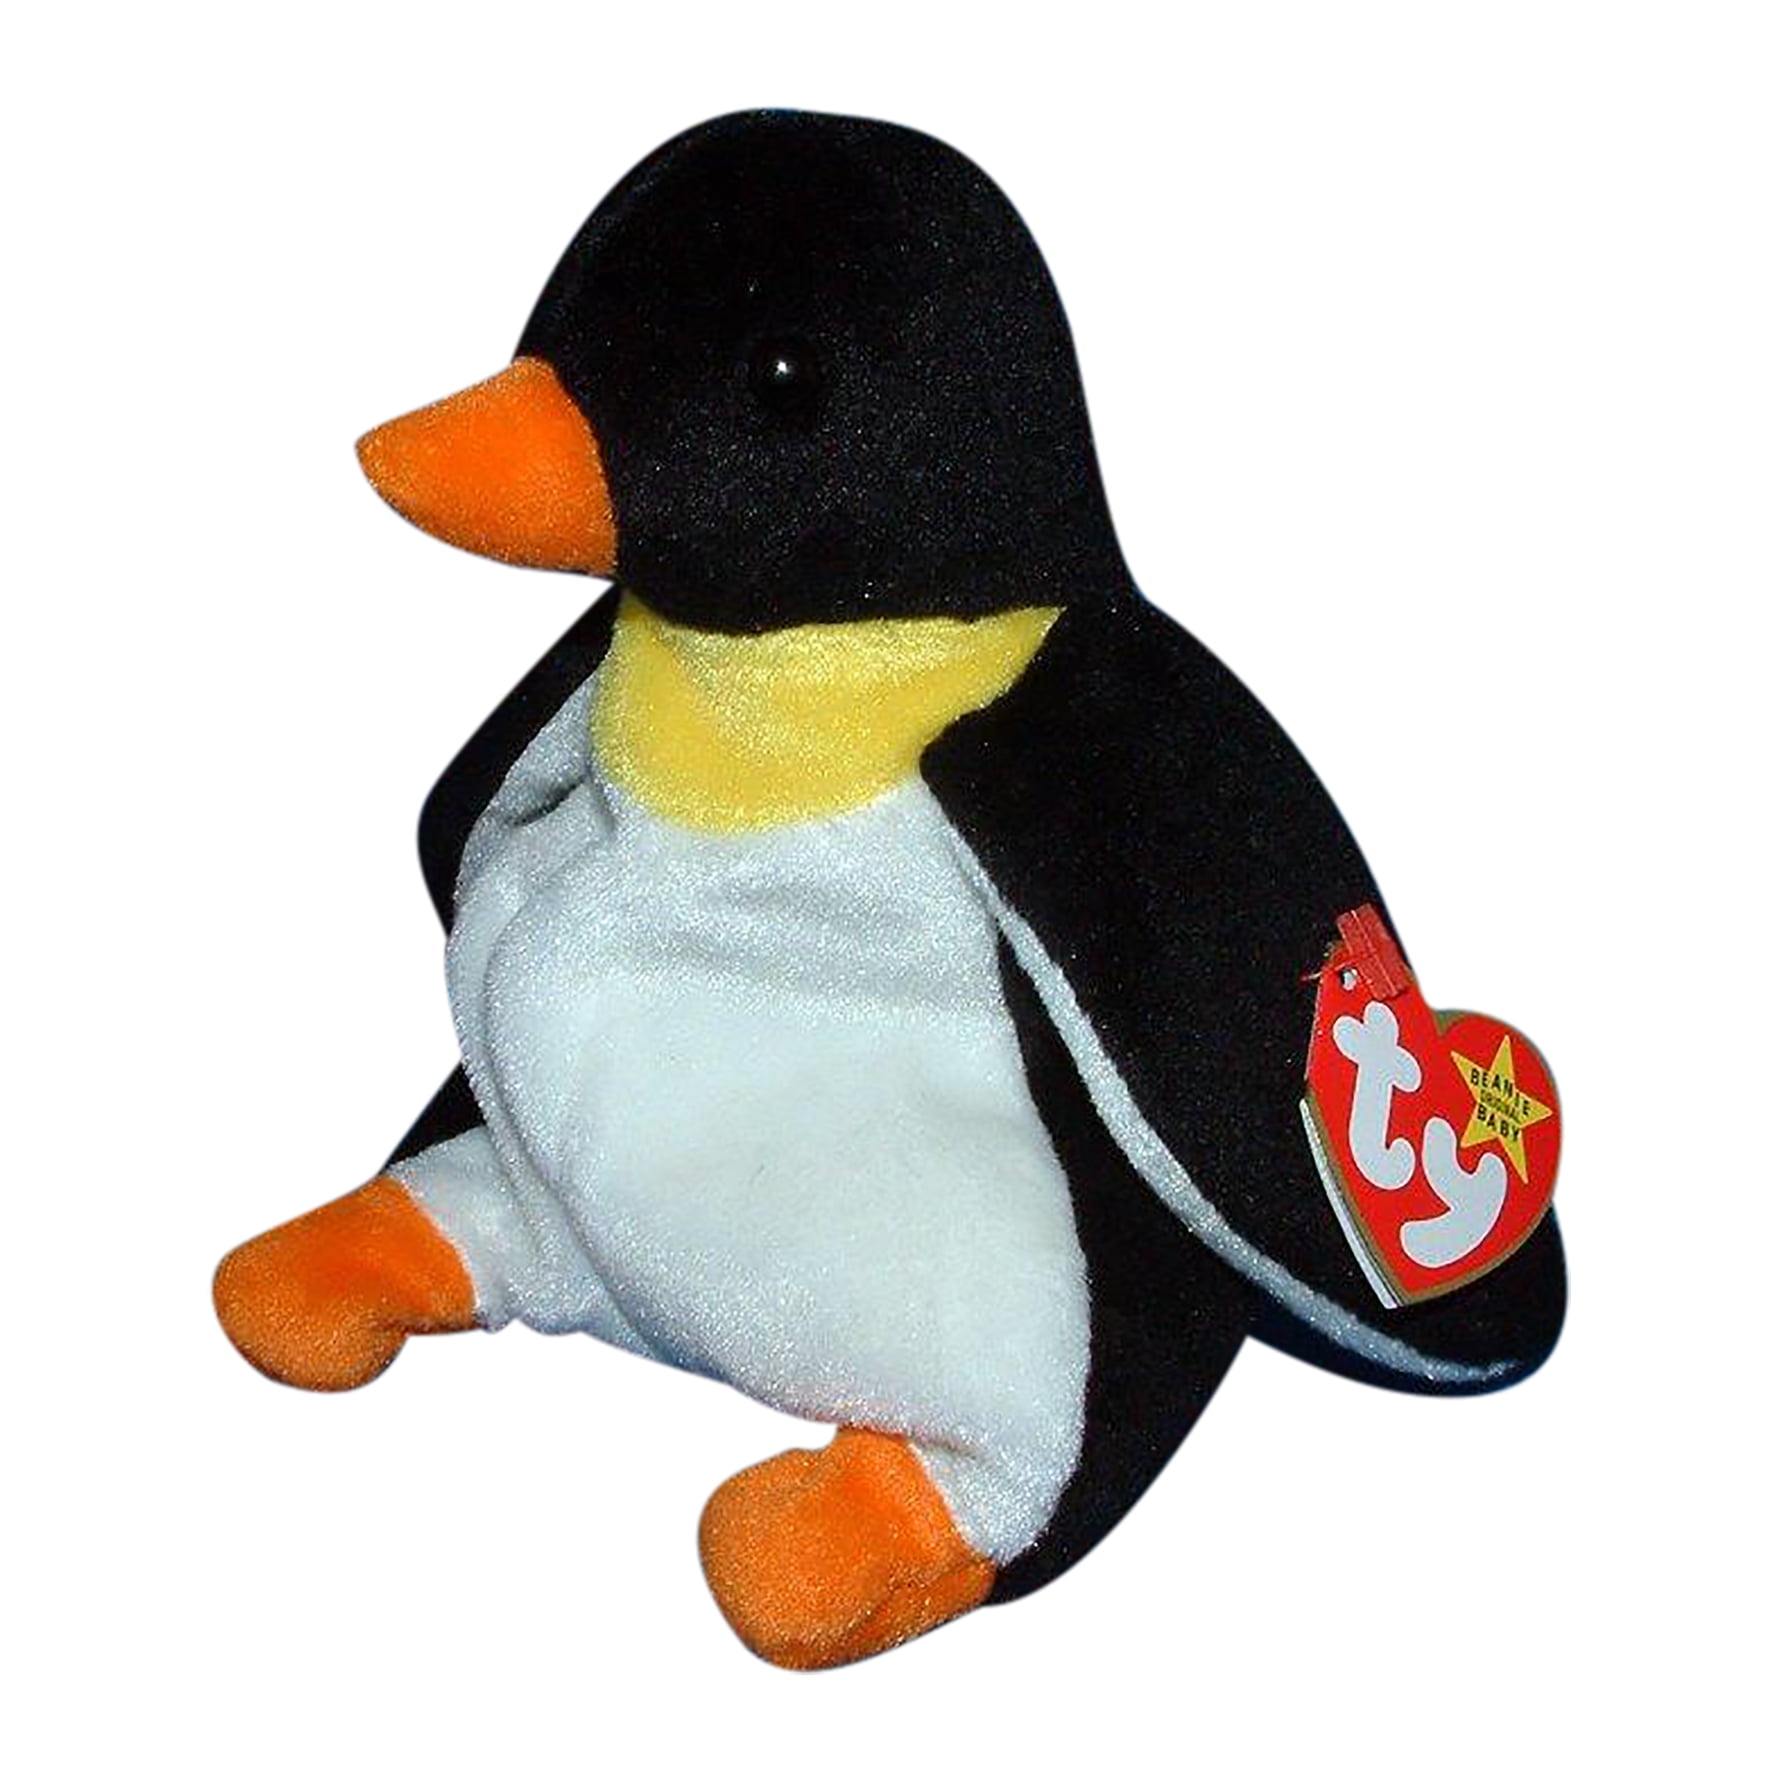 1998 Ty Teenie Beanie Baby McDonalds Happy Meal Plush Toy Waddle the Penguin #11 